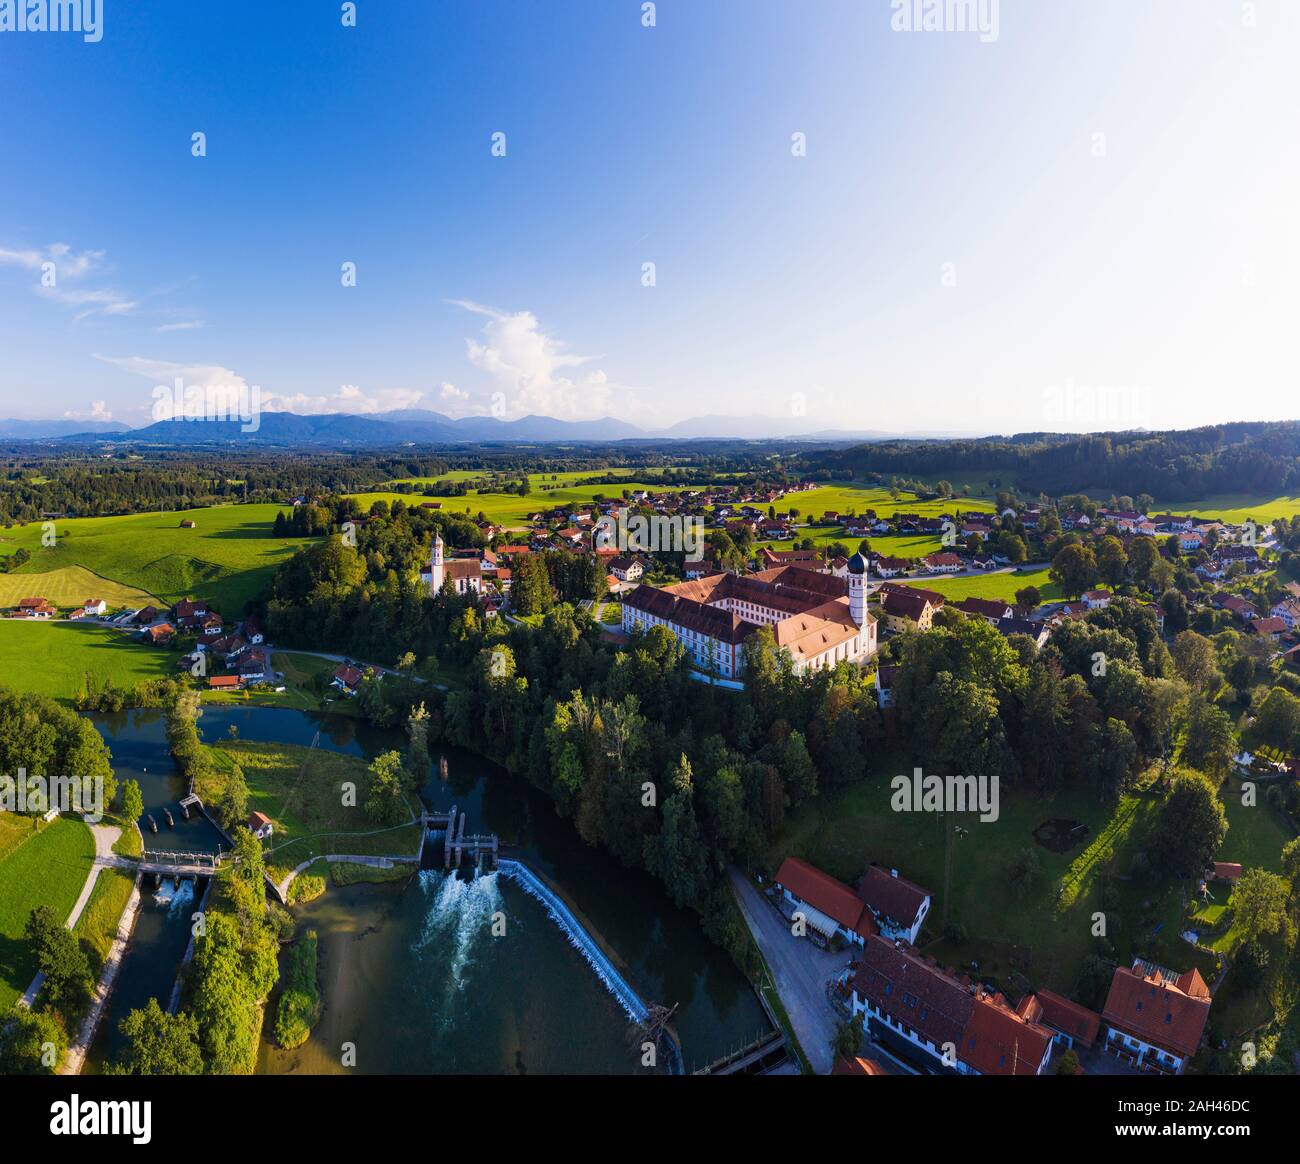 Germany, Bavaria, Eurasburg, Aerial view of Loisach river and countryside town Stock Photo